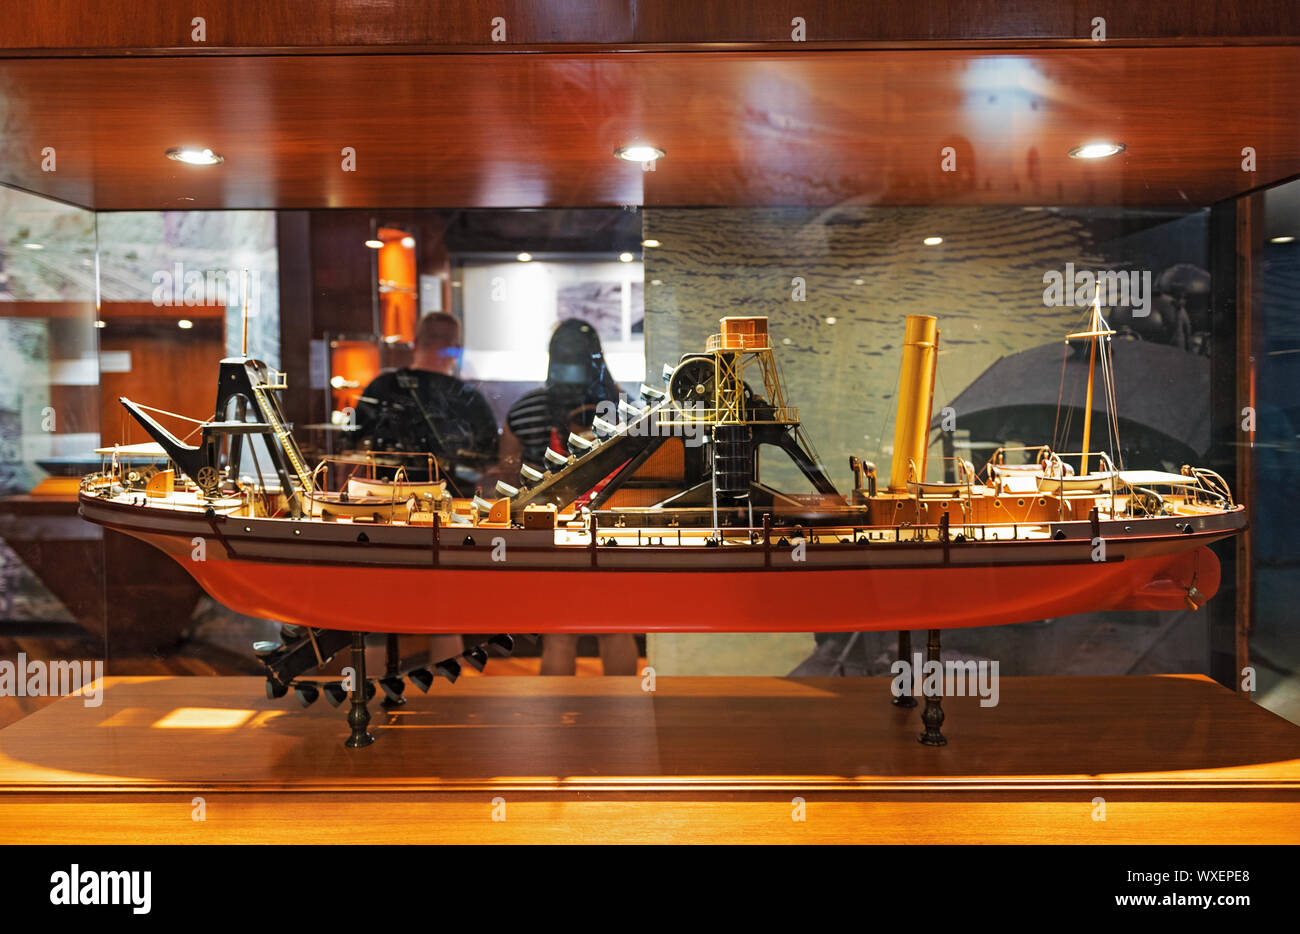 model dredging boat in the visitor center of panama Canal lock miraflores panama city Stock Photo